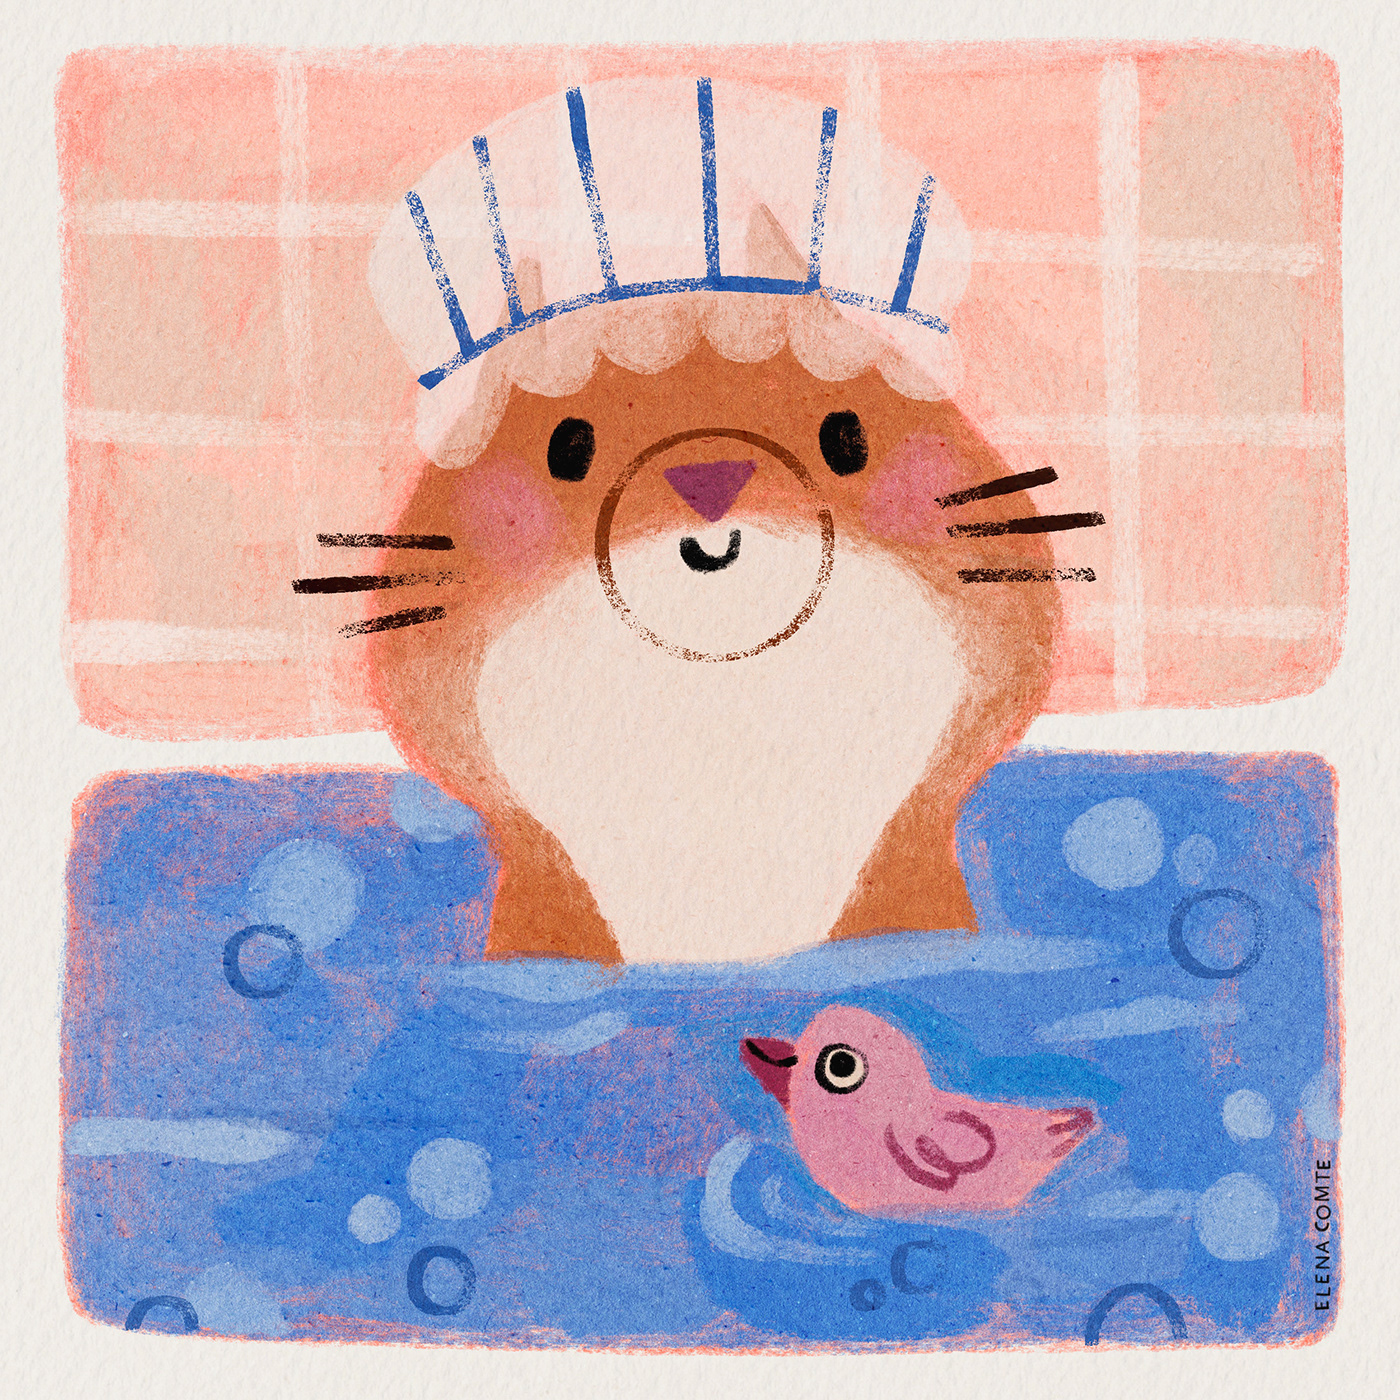 Hand painted illustration of a smiling cat taking his bath with his shower cap.